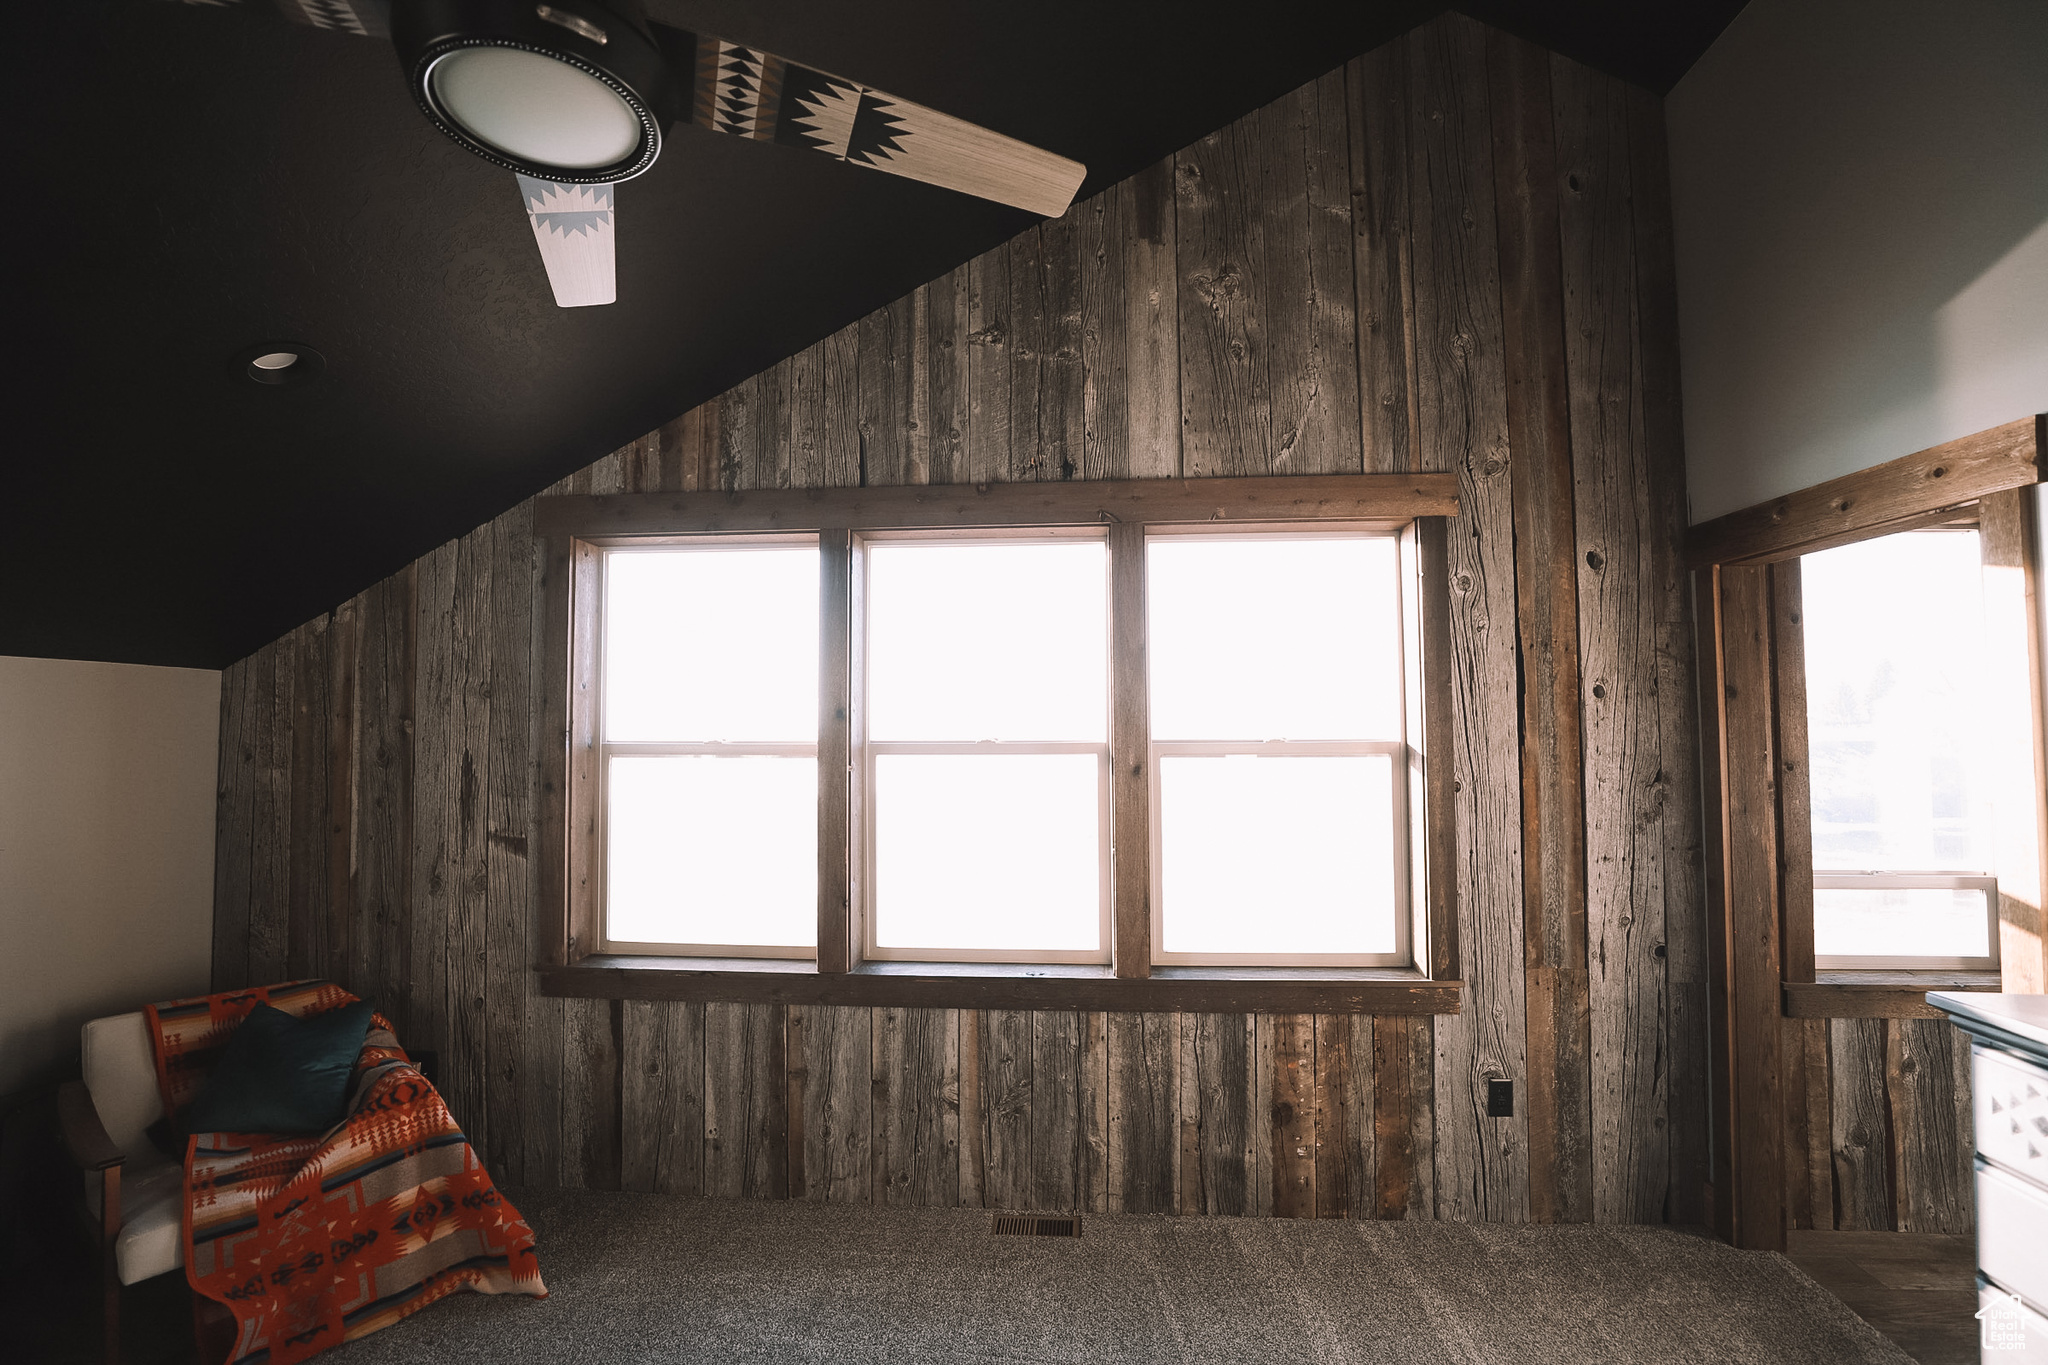 Primary bedroom with wood walls, carpet floors, and a healthy amount of sunlight